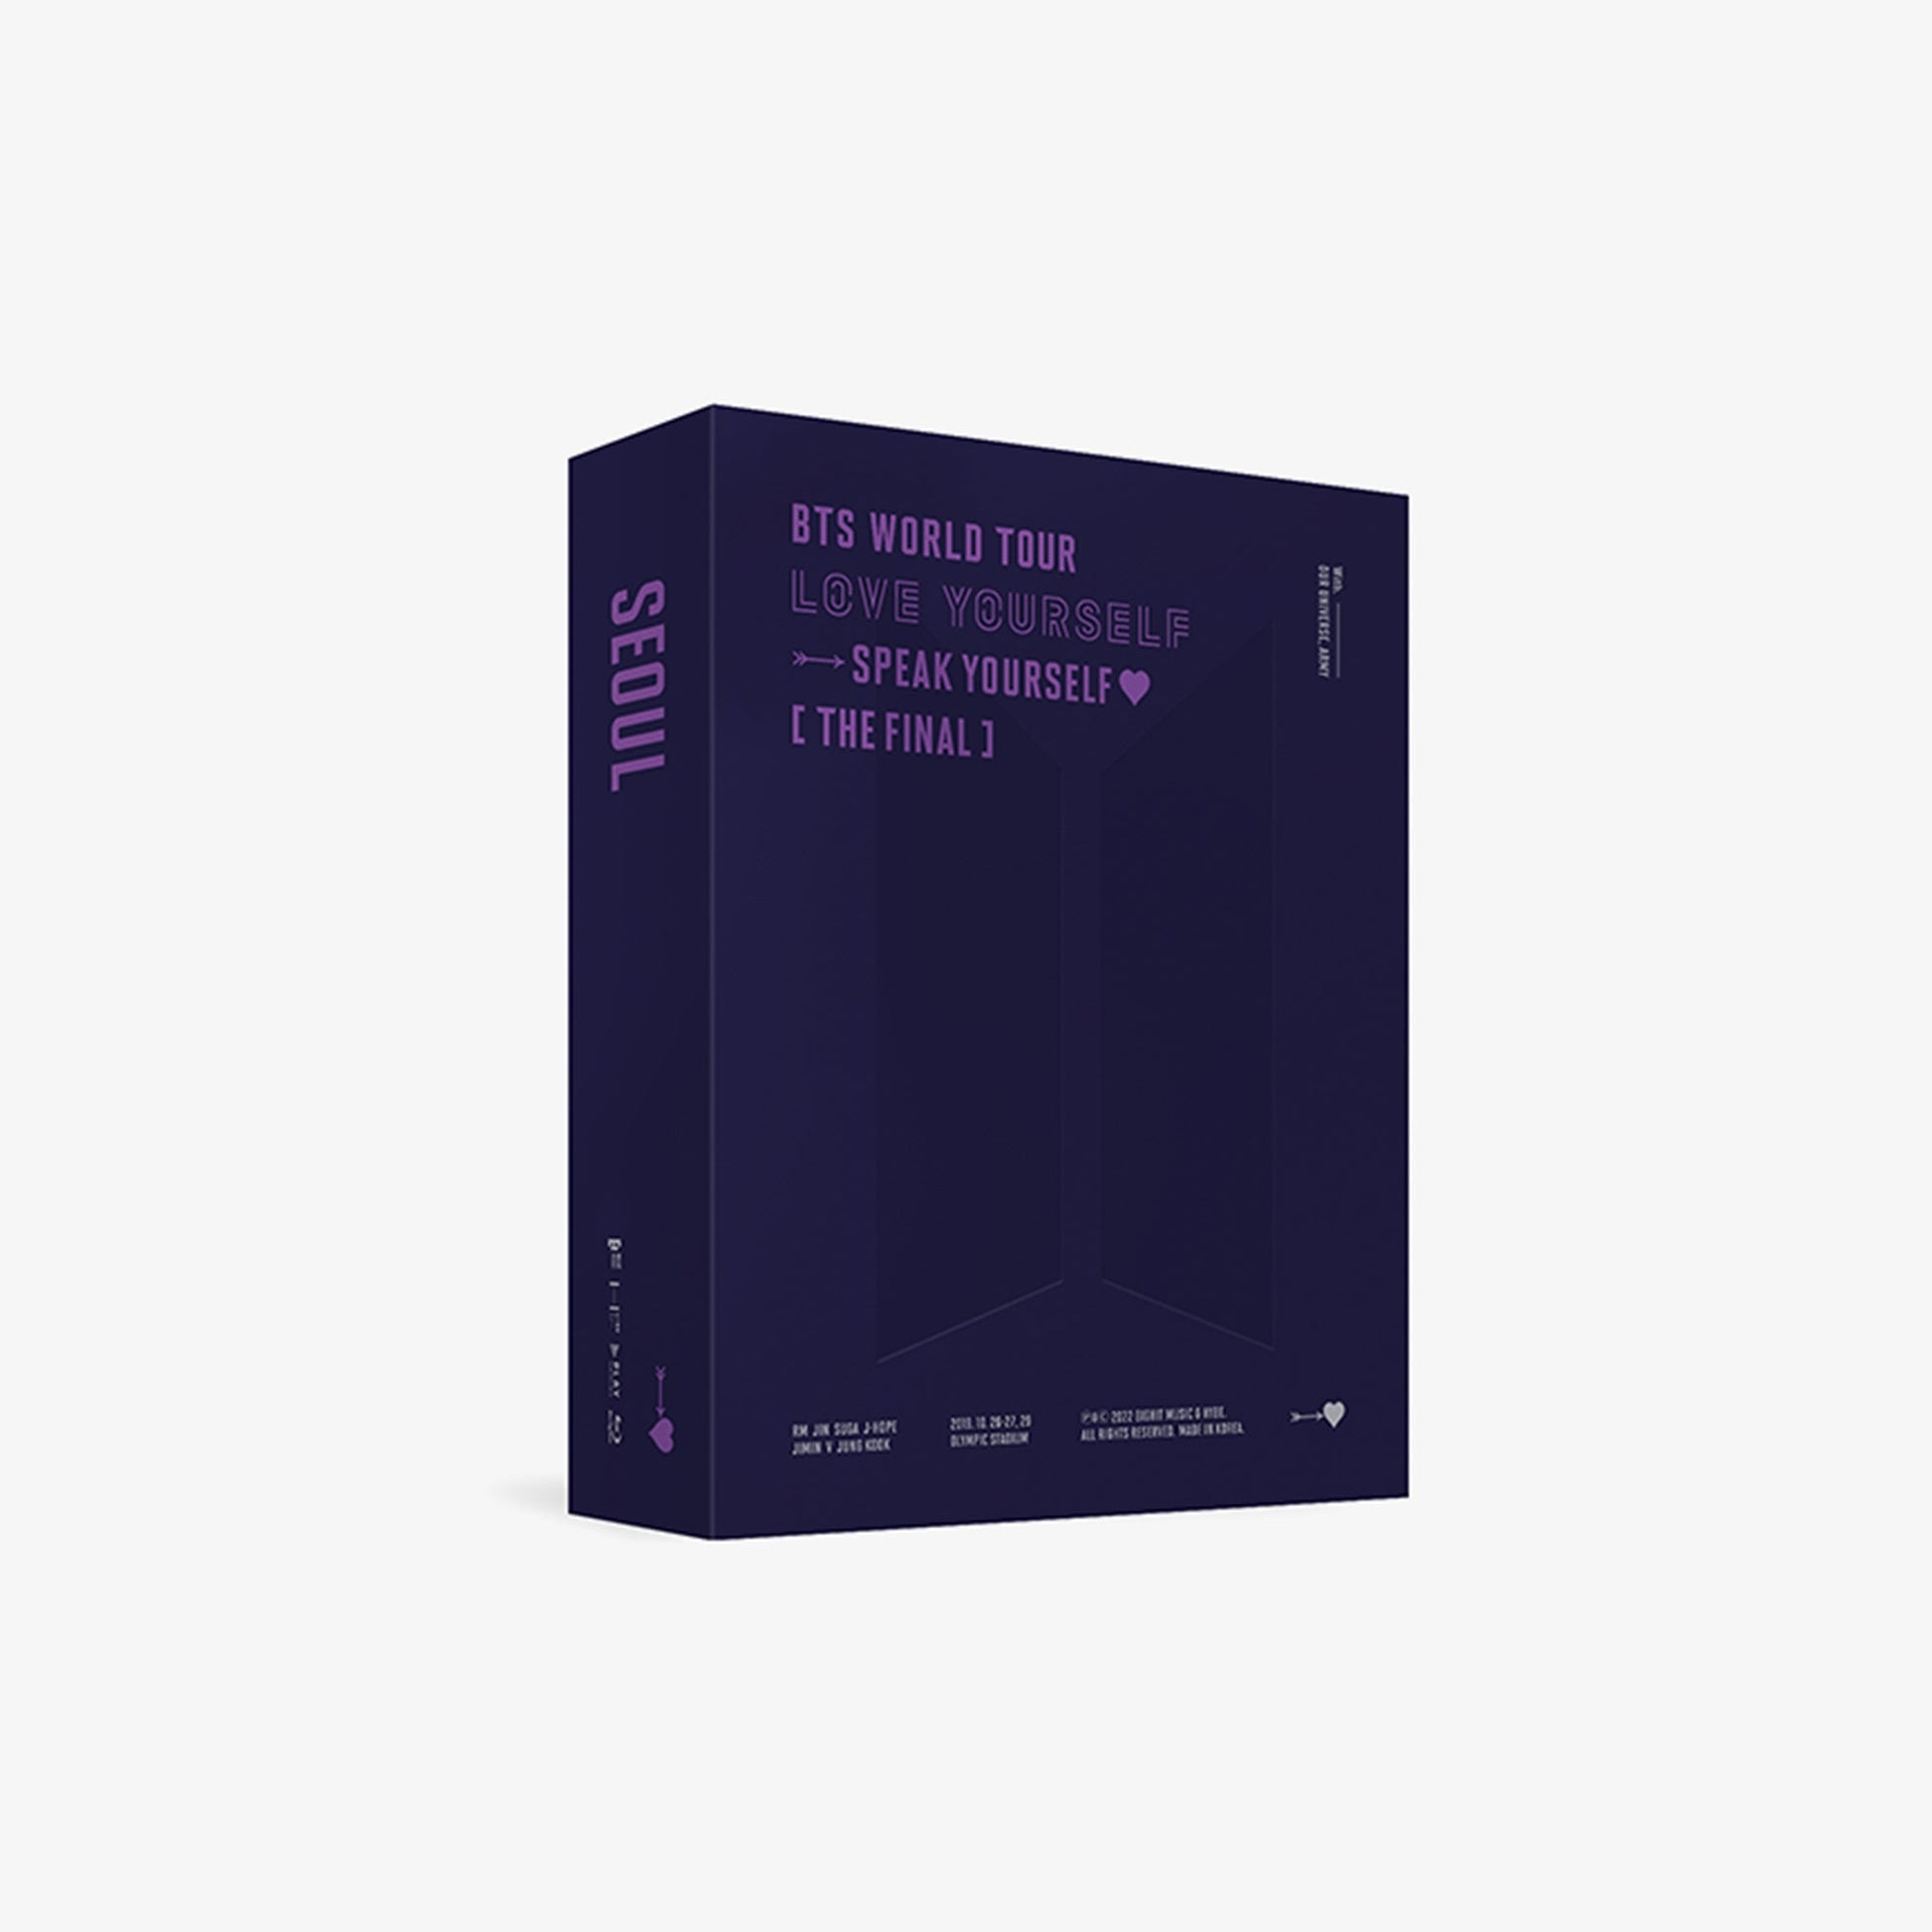 BTS WORLD TOUR LOVE YOURSELF 'SPEAK YOURSELF♥' [THE FINAL] (BLU-RAY) COVER